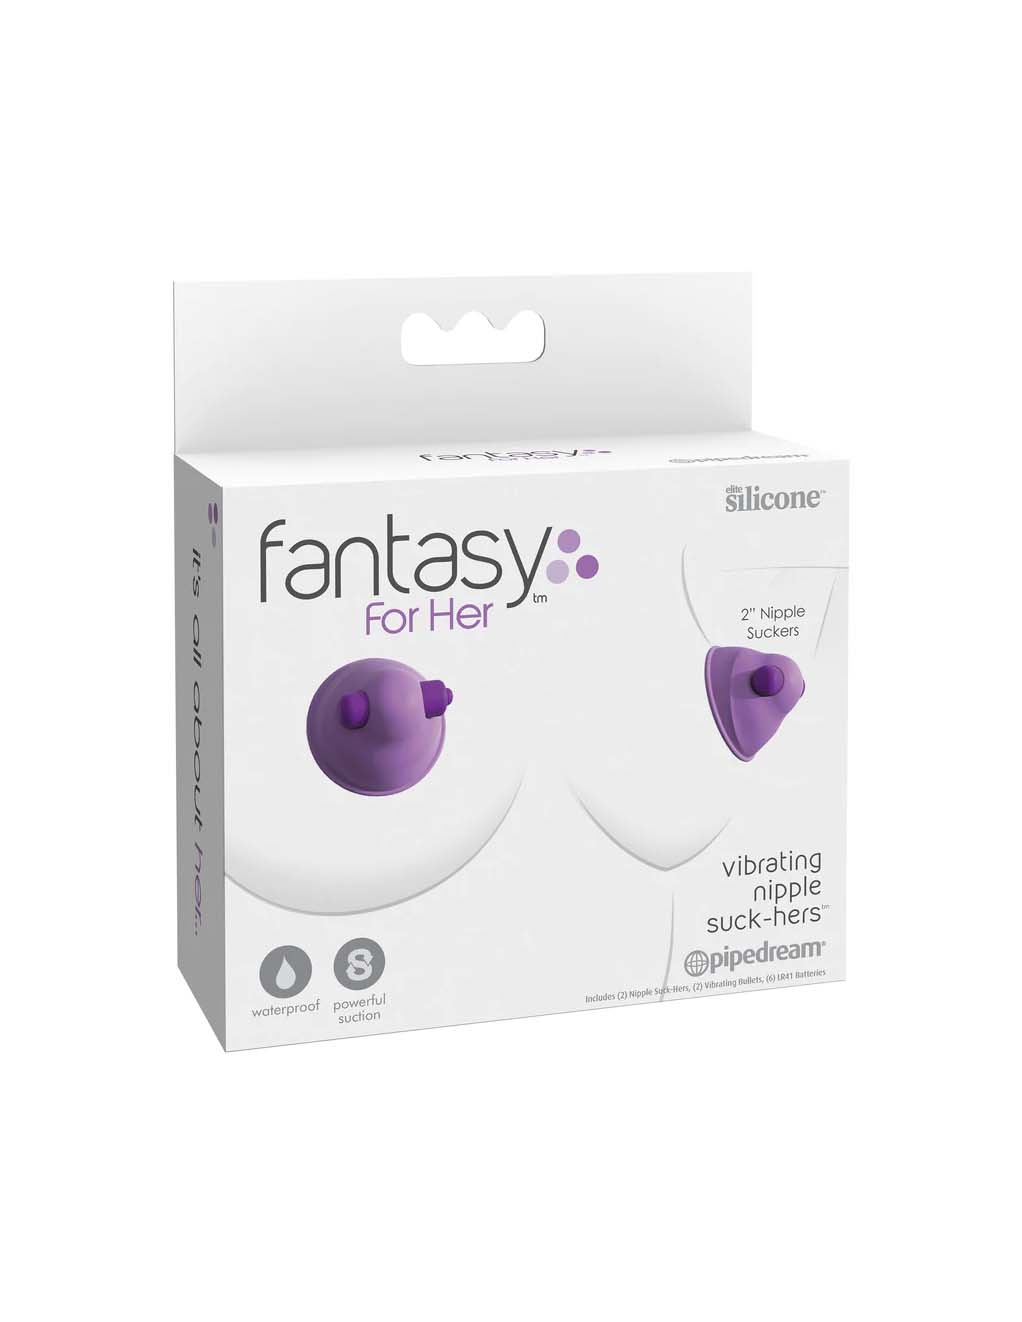 Fantasy For Her Vibrating Nipple Suck-Hers- Box